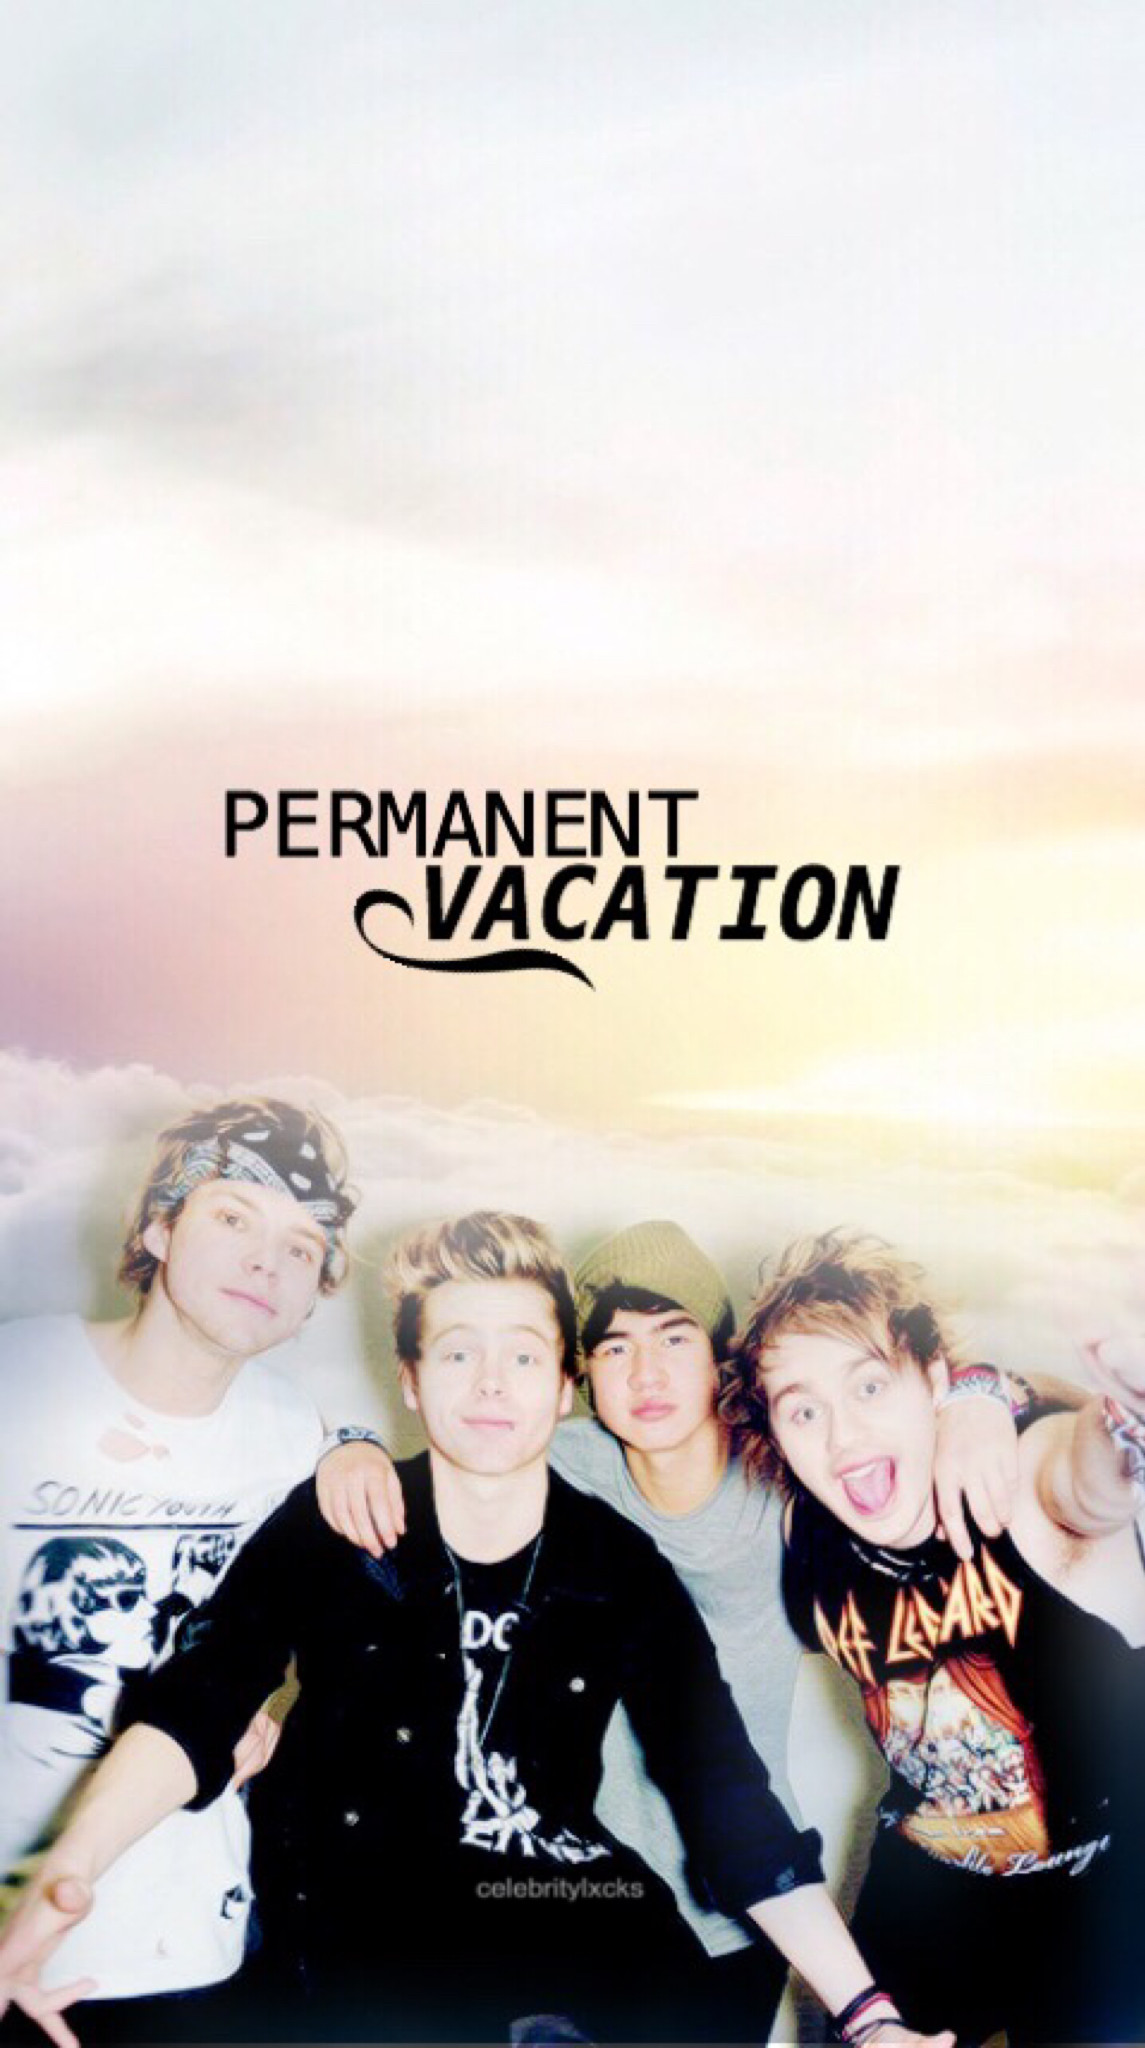 1145x2048 FREE •5 Seconds Of Summer 'Permanent Vacation' Lockscreen• please LIKE if  you